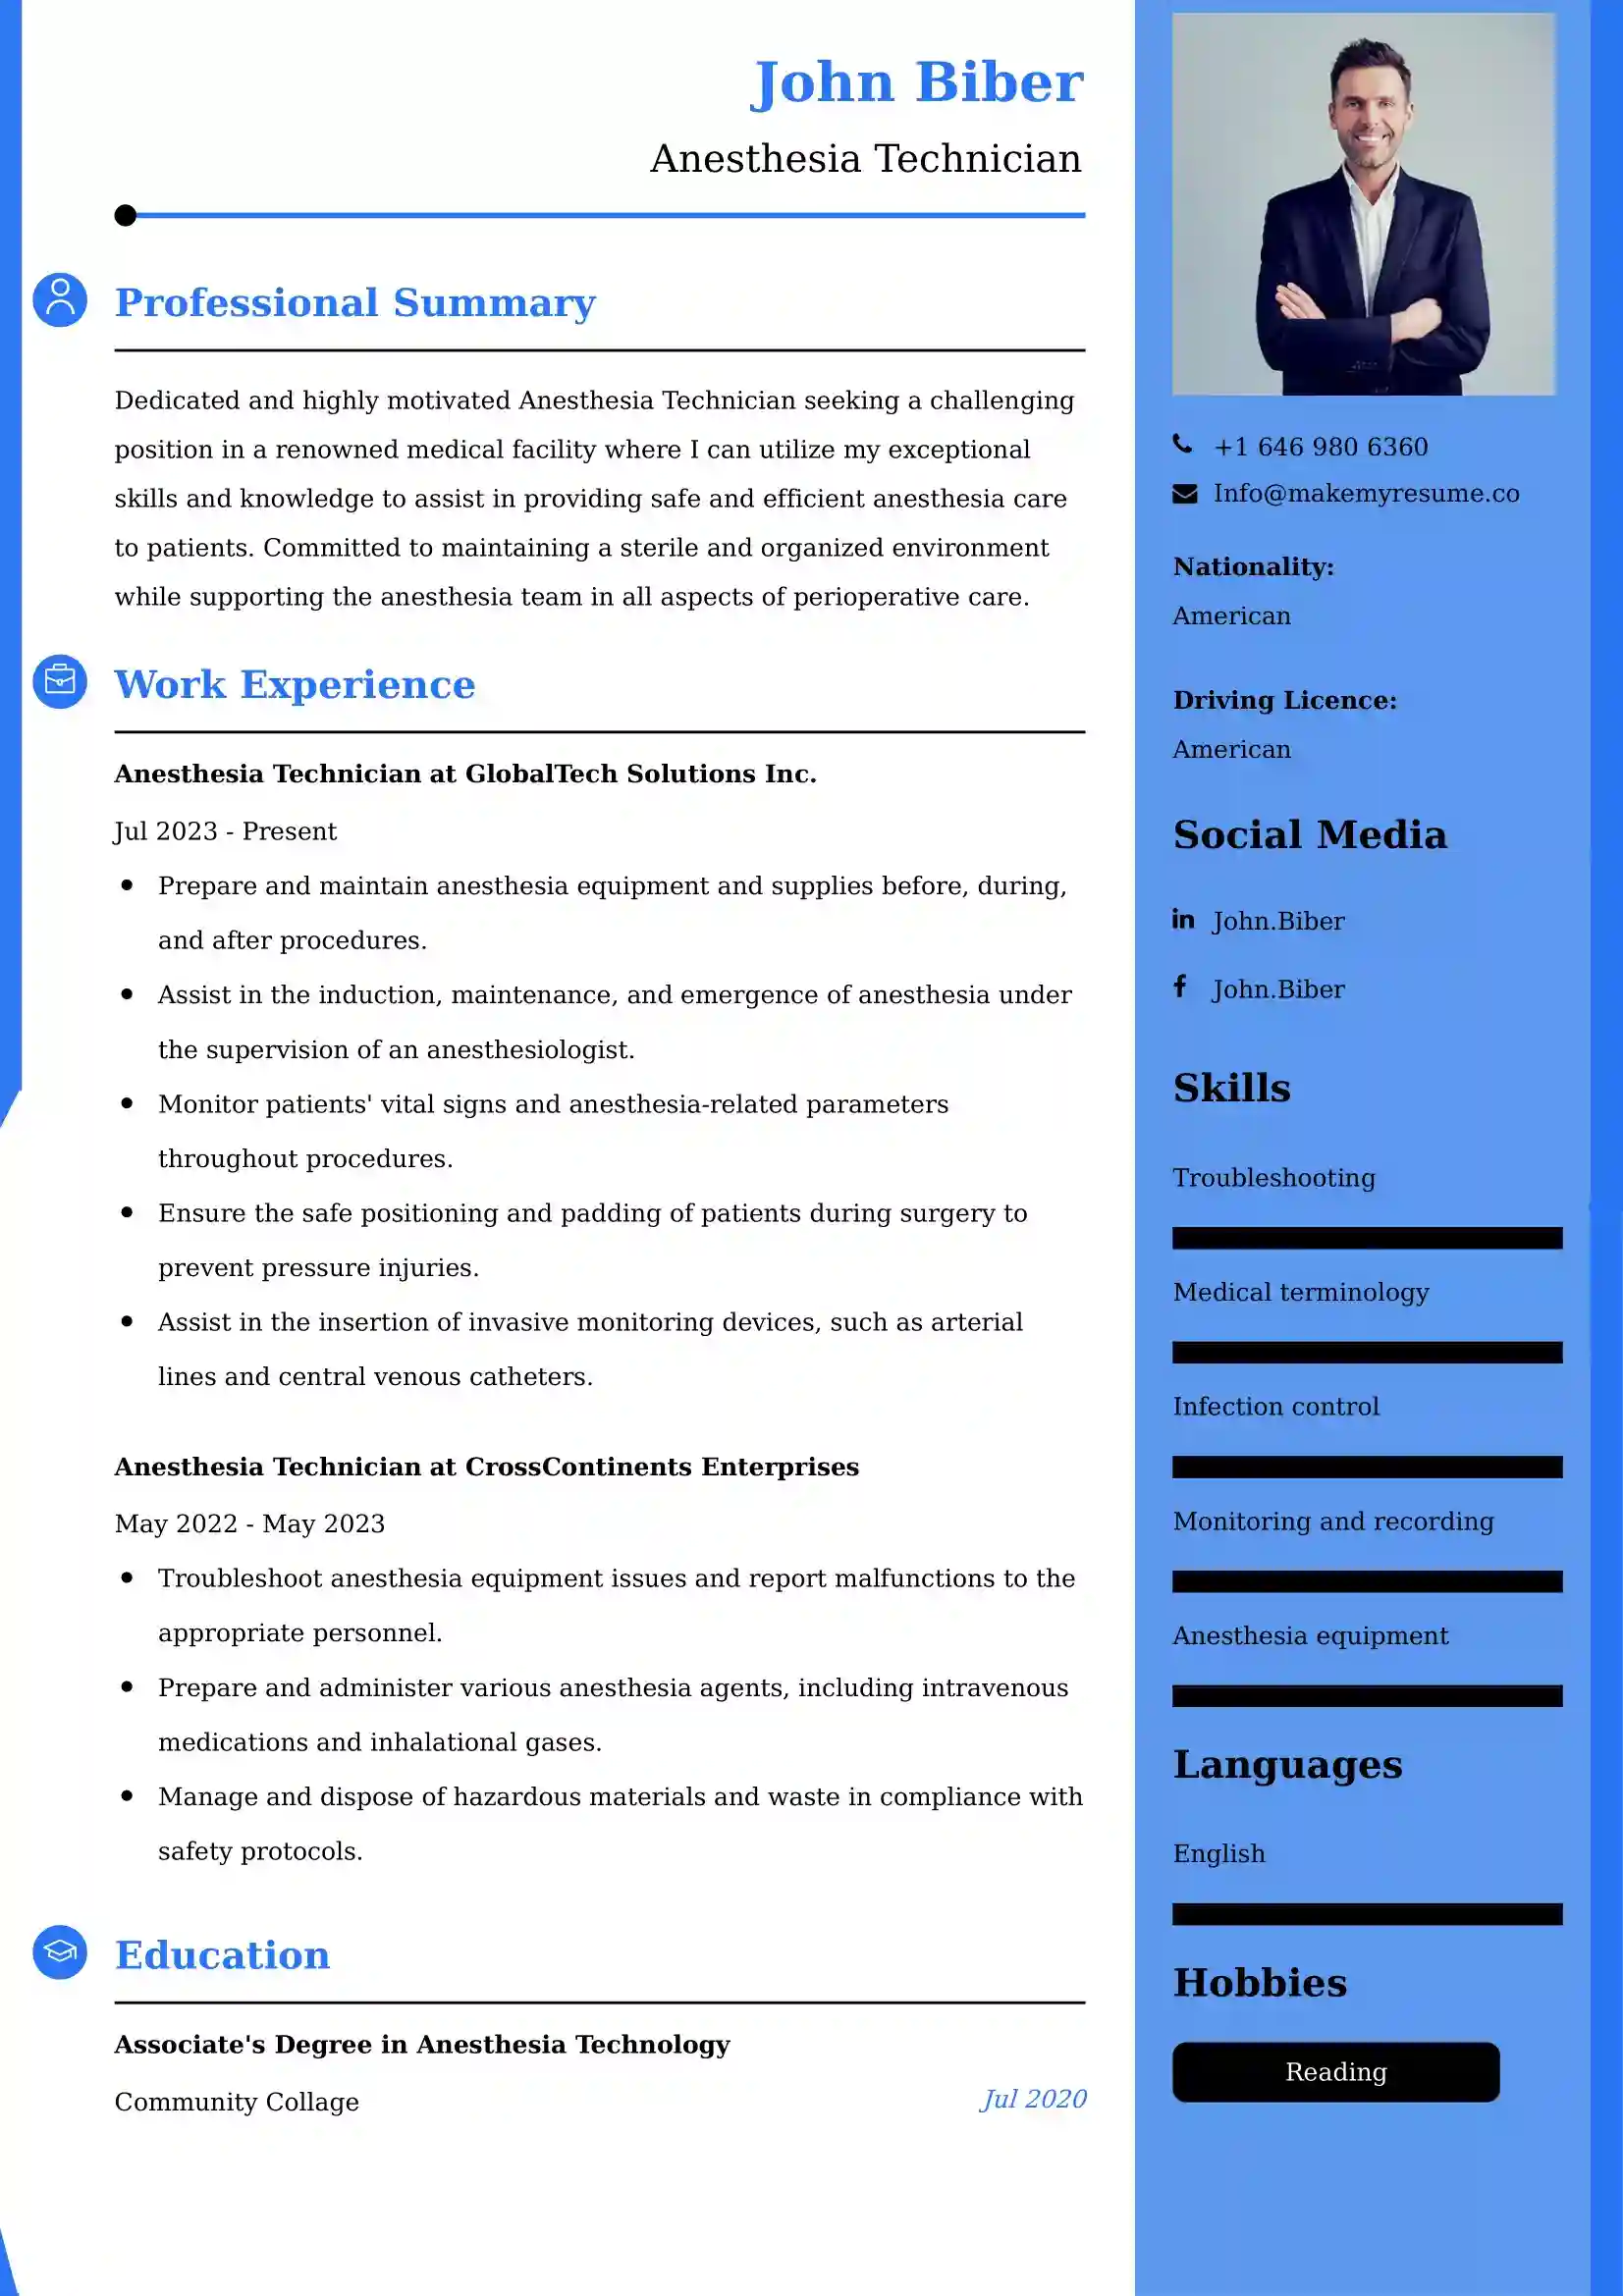 Anesthesia Technician Resume Examples - UK Format, Latest Template.